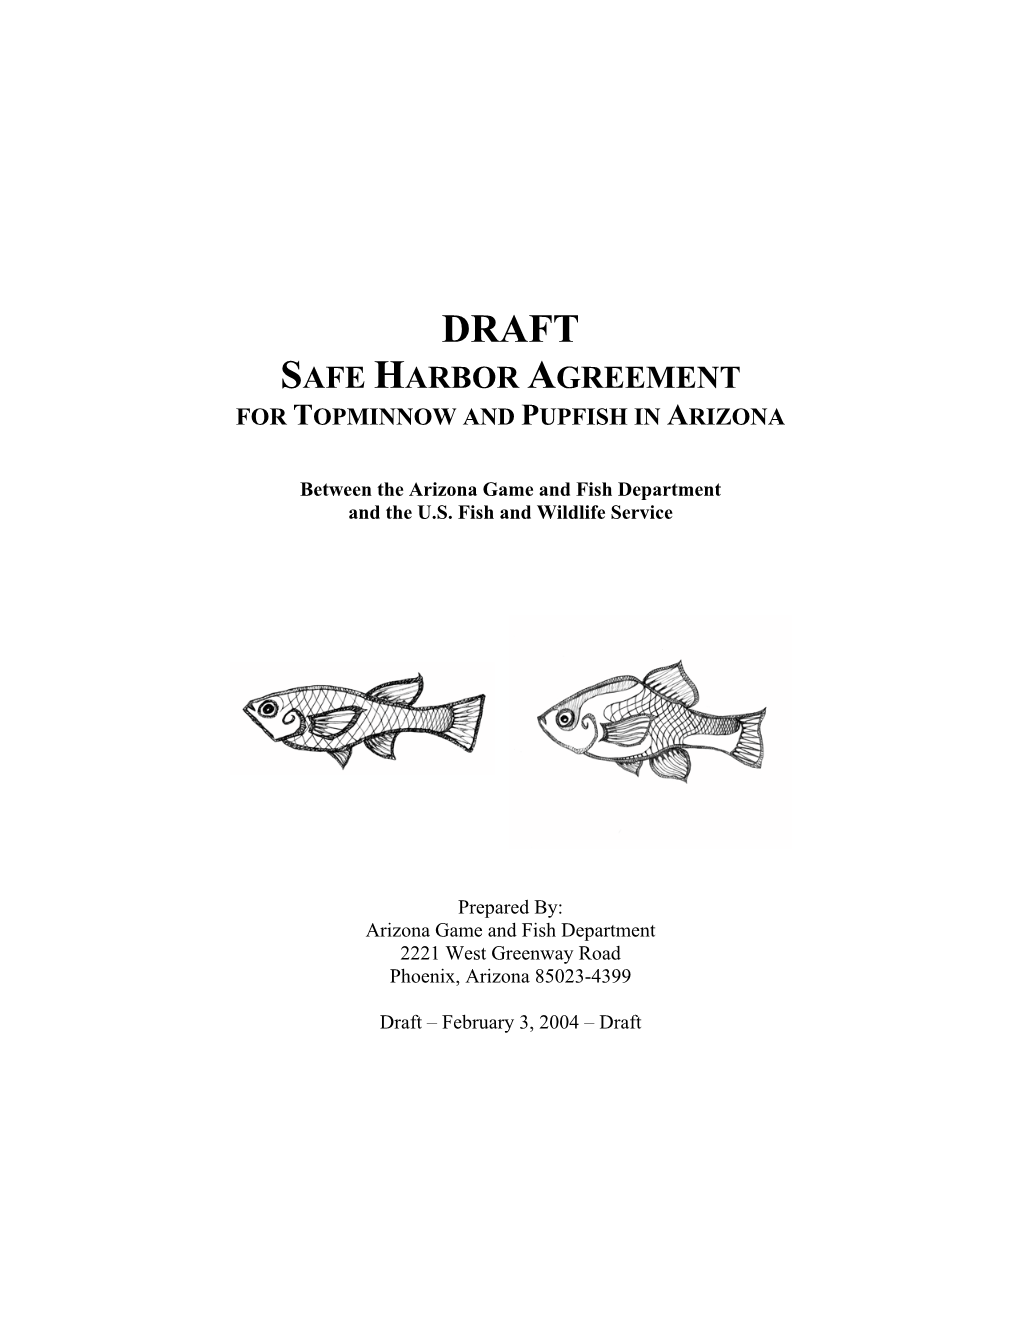 Safe Harbor Agreement for Topminnow and Pupfish in Arizona